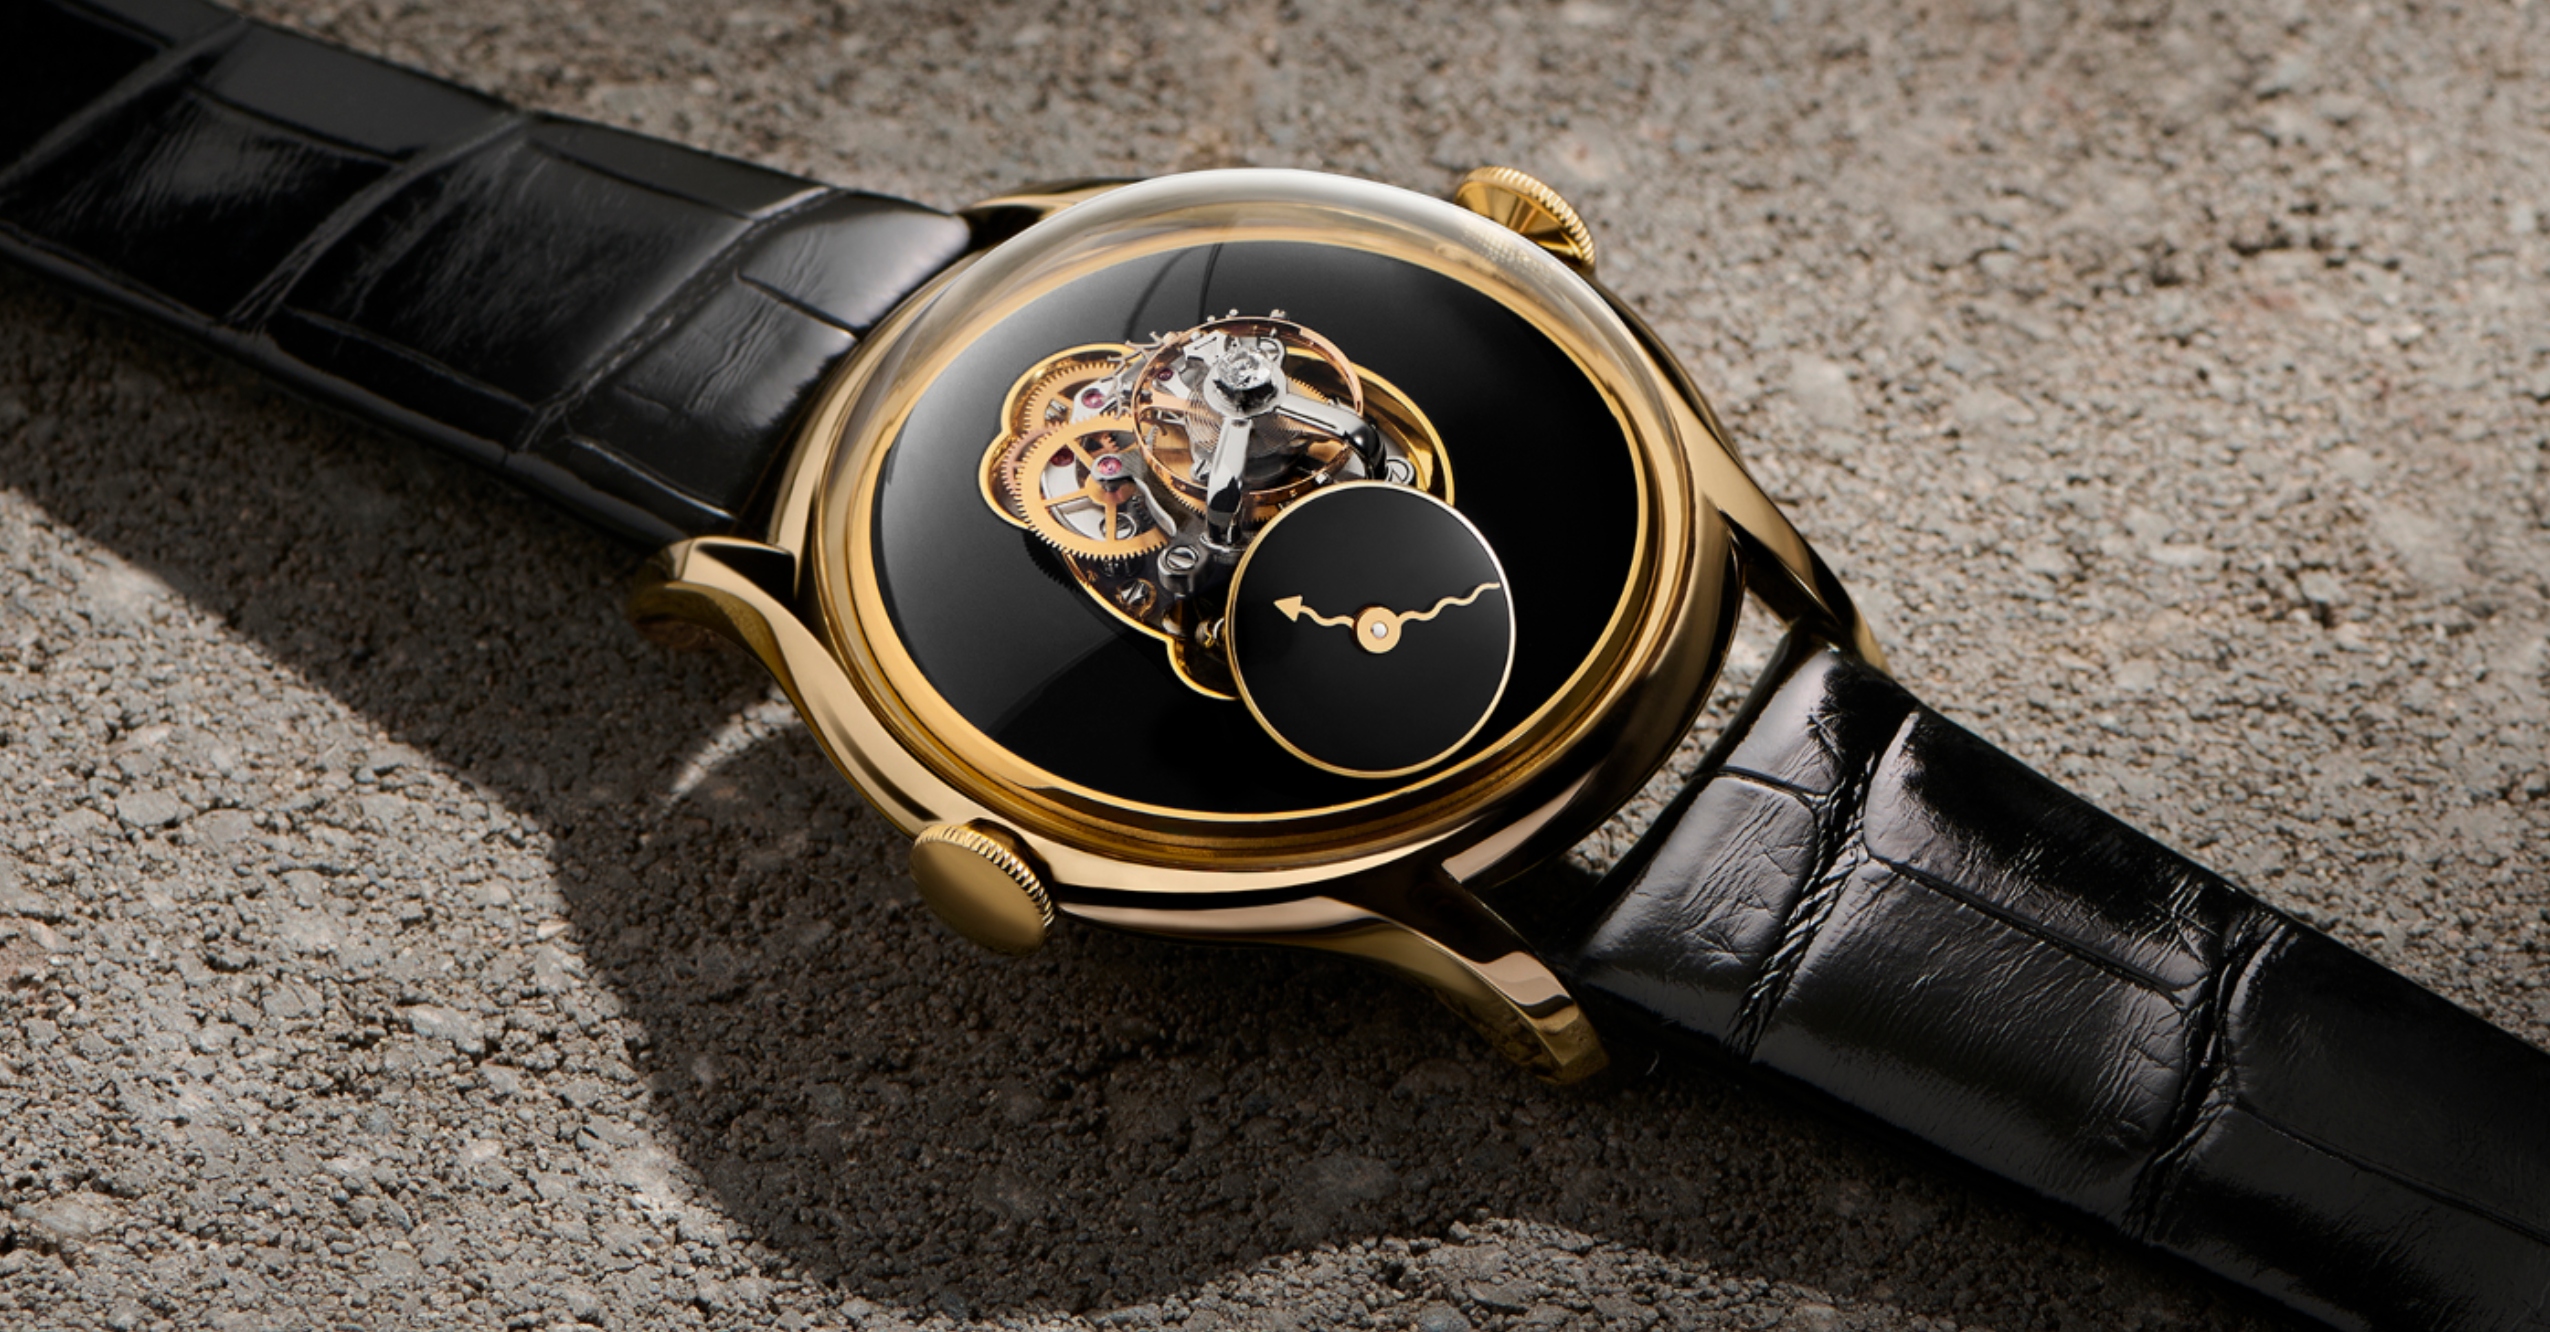 This MB&F Watch Dial Is A Six-Figure Gemstone Sculpture